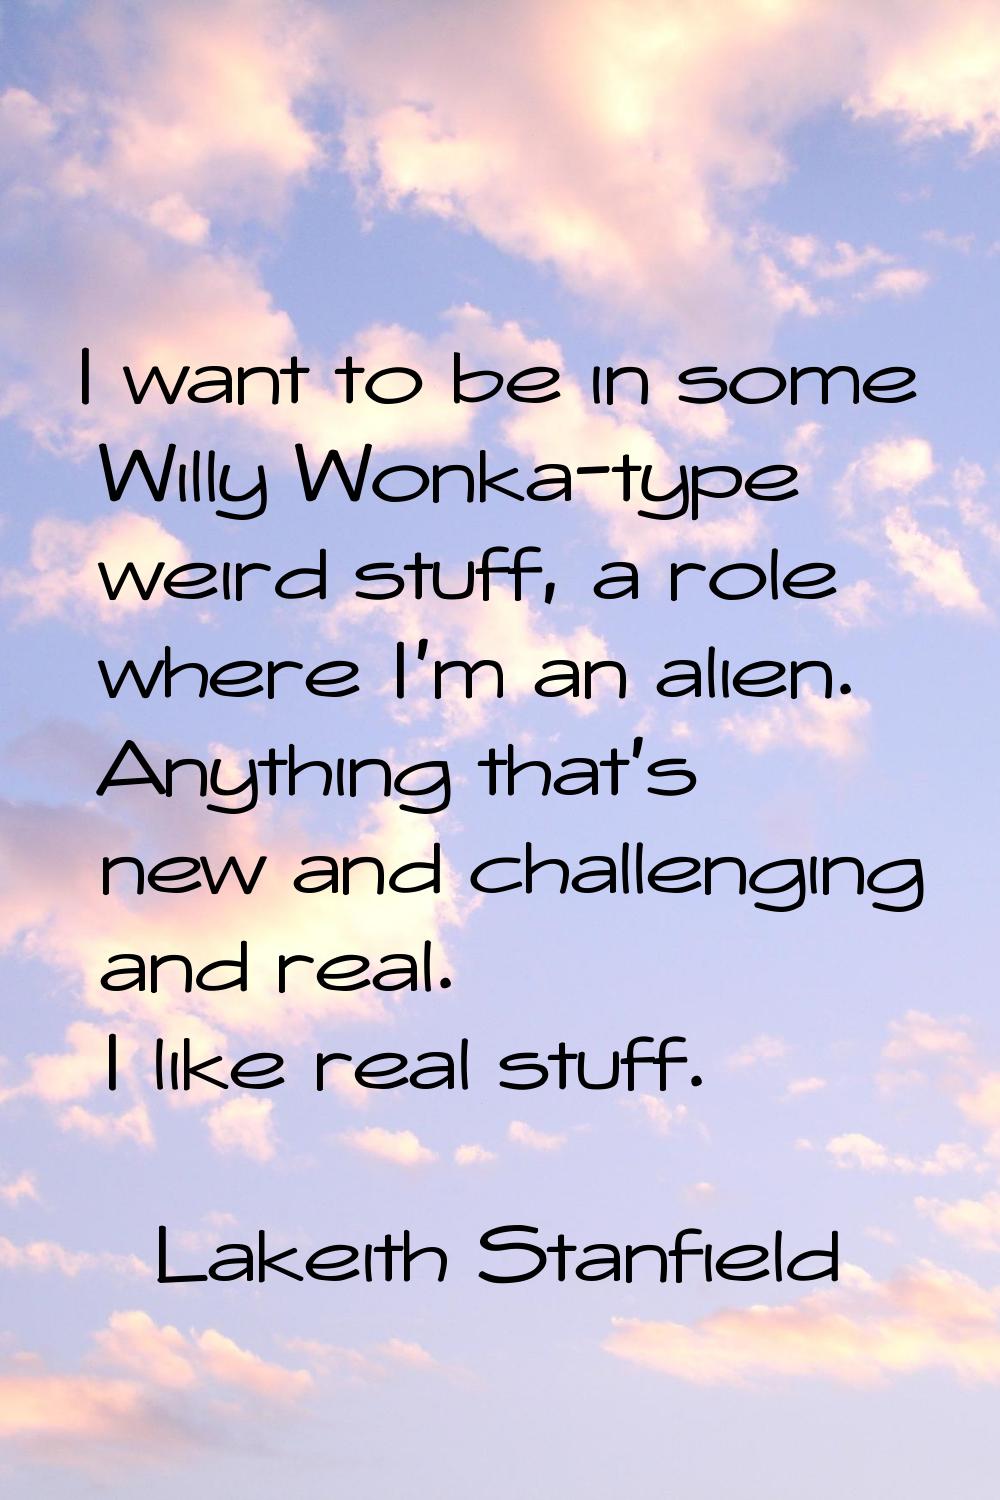 I want to be in some Willy Wonka-type weird stuff, a role where I'm an alien. Anything that's new a